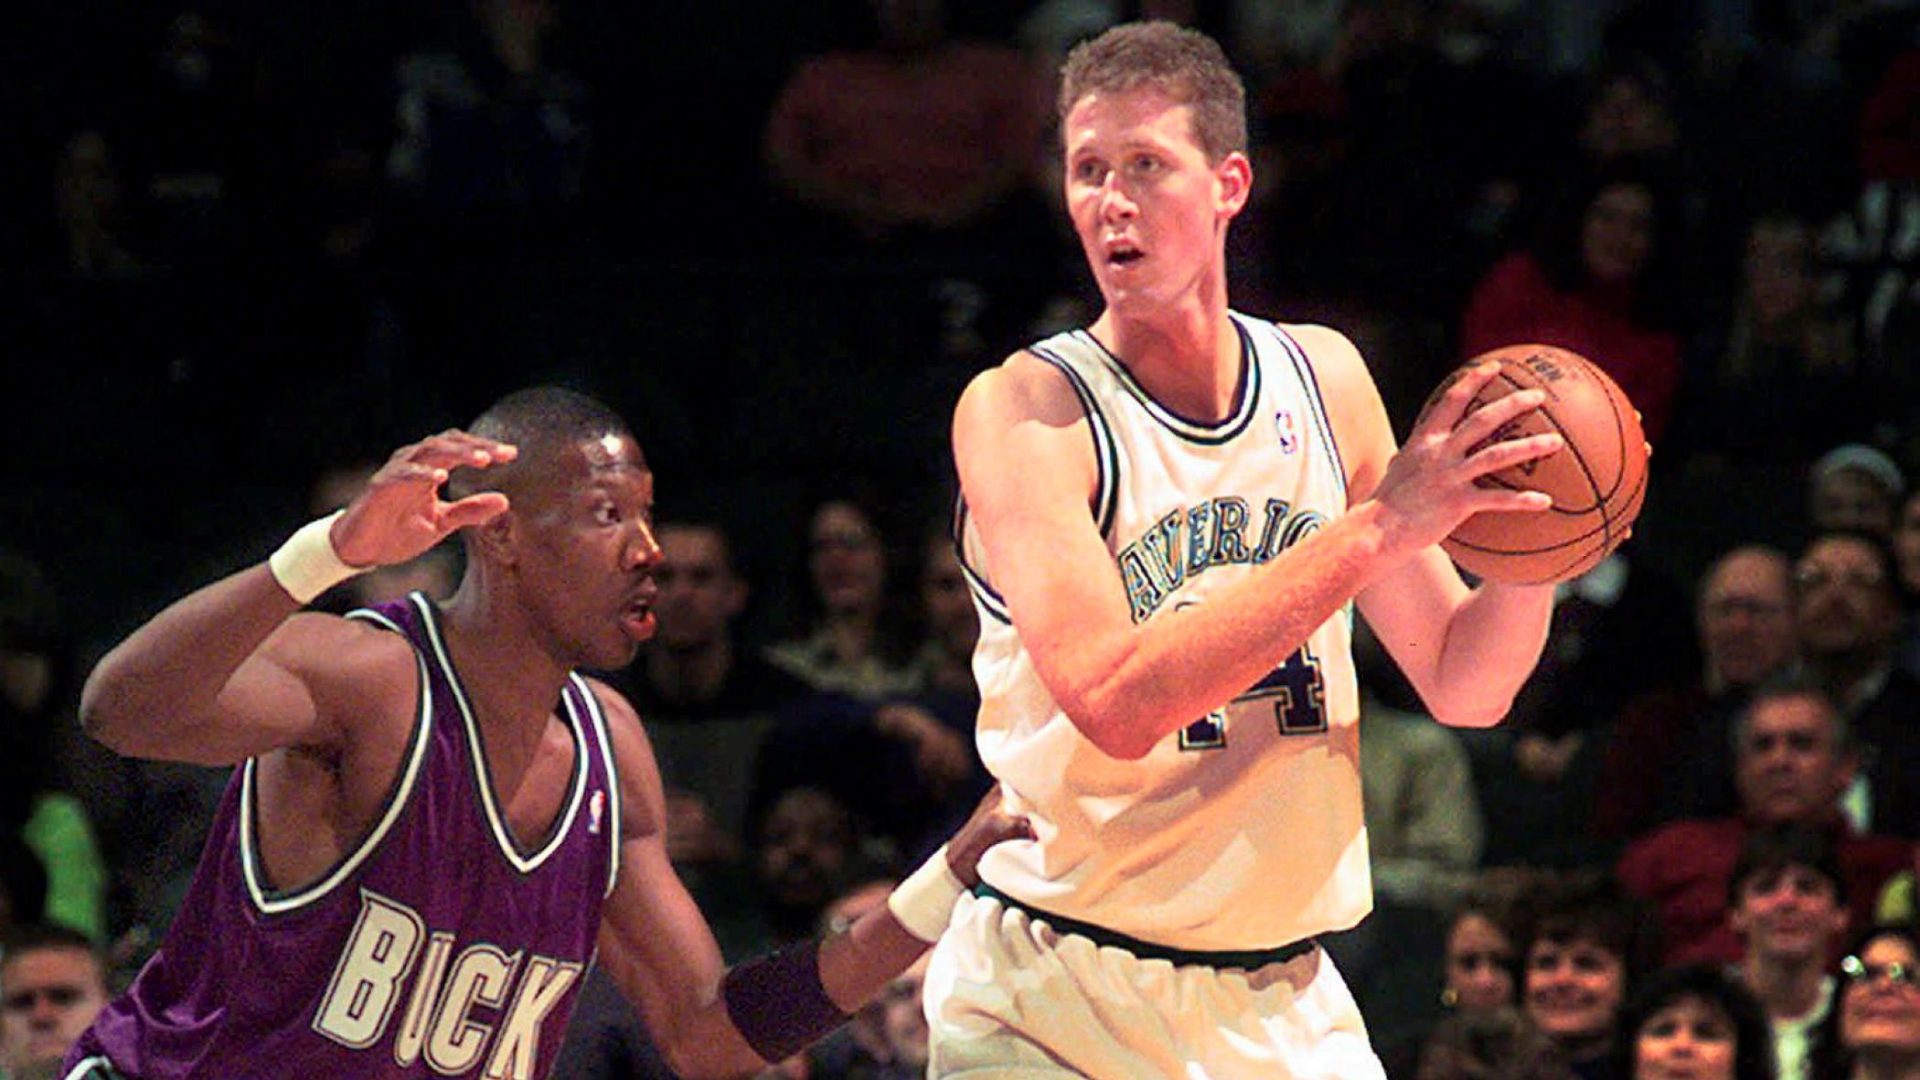 In this Nov. 22, 1997, file photo, Dallas Mavericks' Shawn Bradley (44) looks to pass as Milwaukee Bucks' Ervin Johnson (40) defends during the first quarter of an NBA basketball game at the Reunion Arena in Dallas.